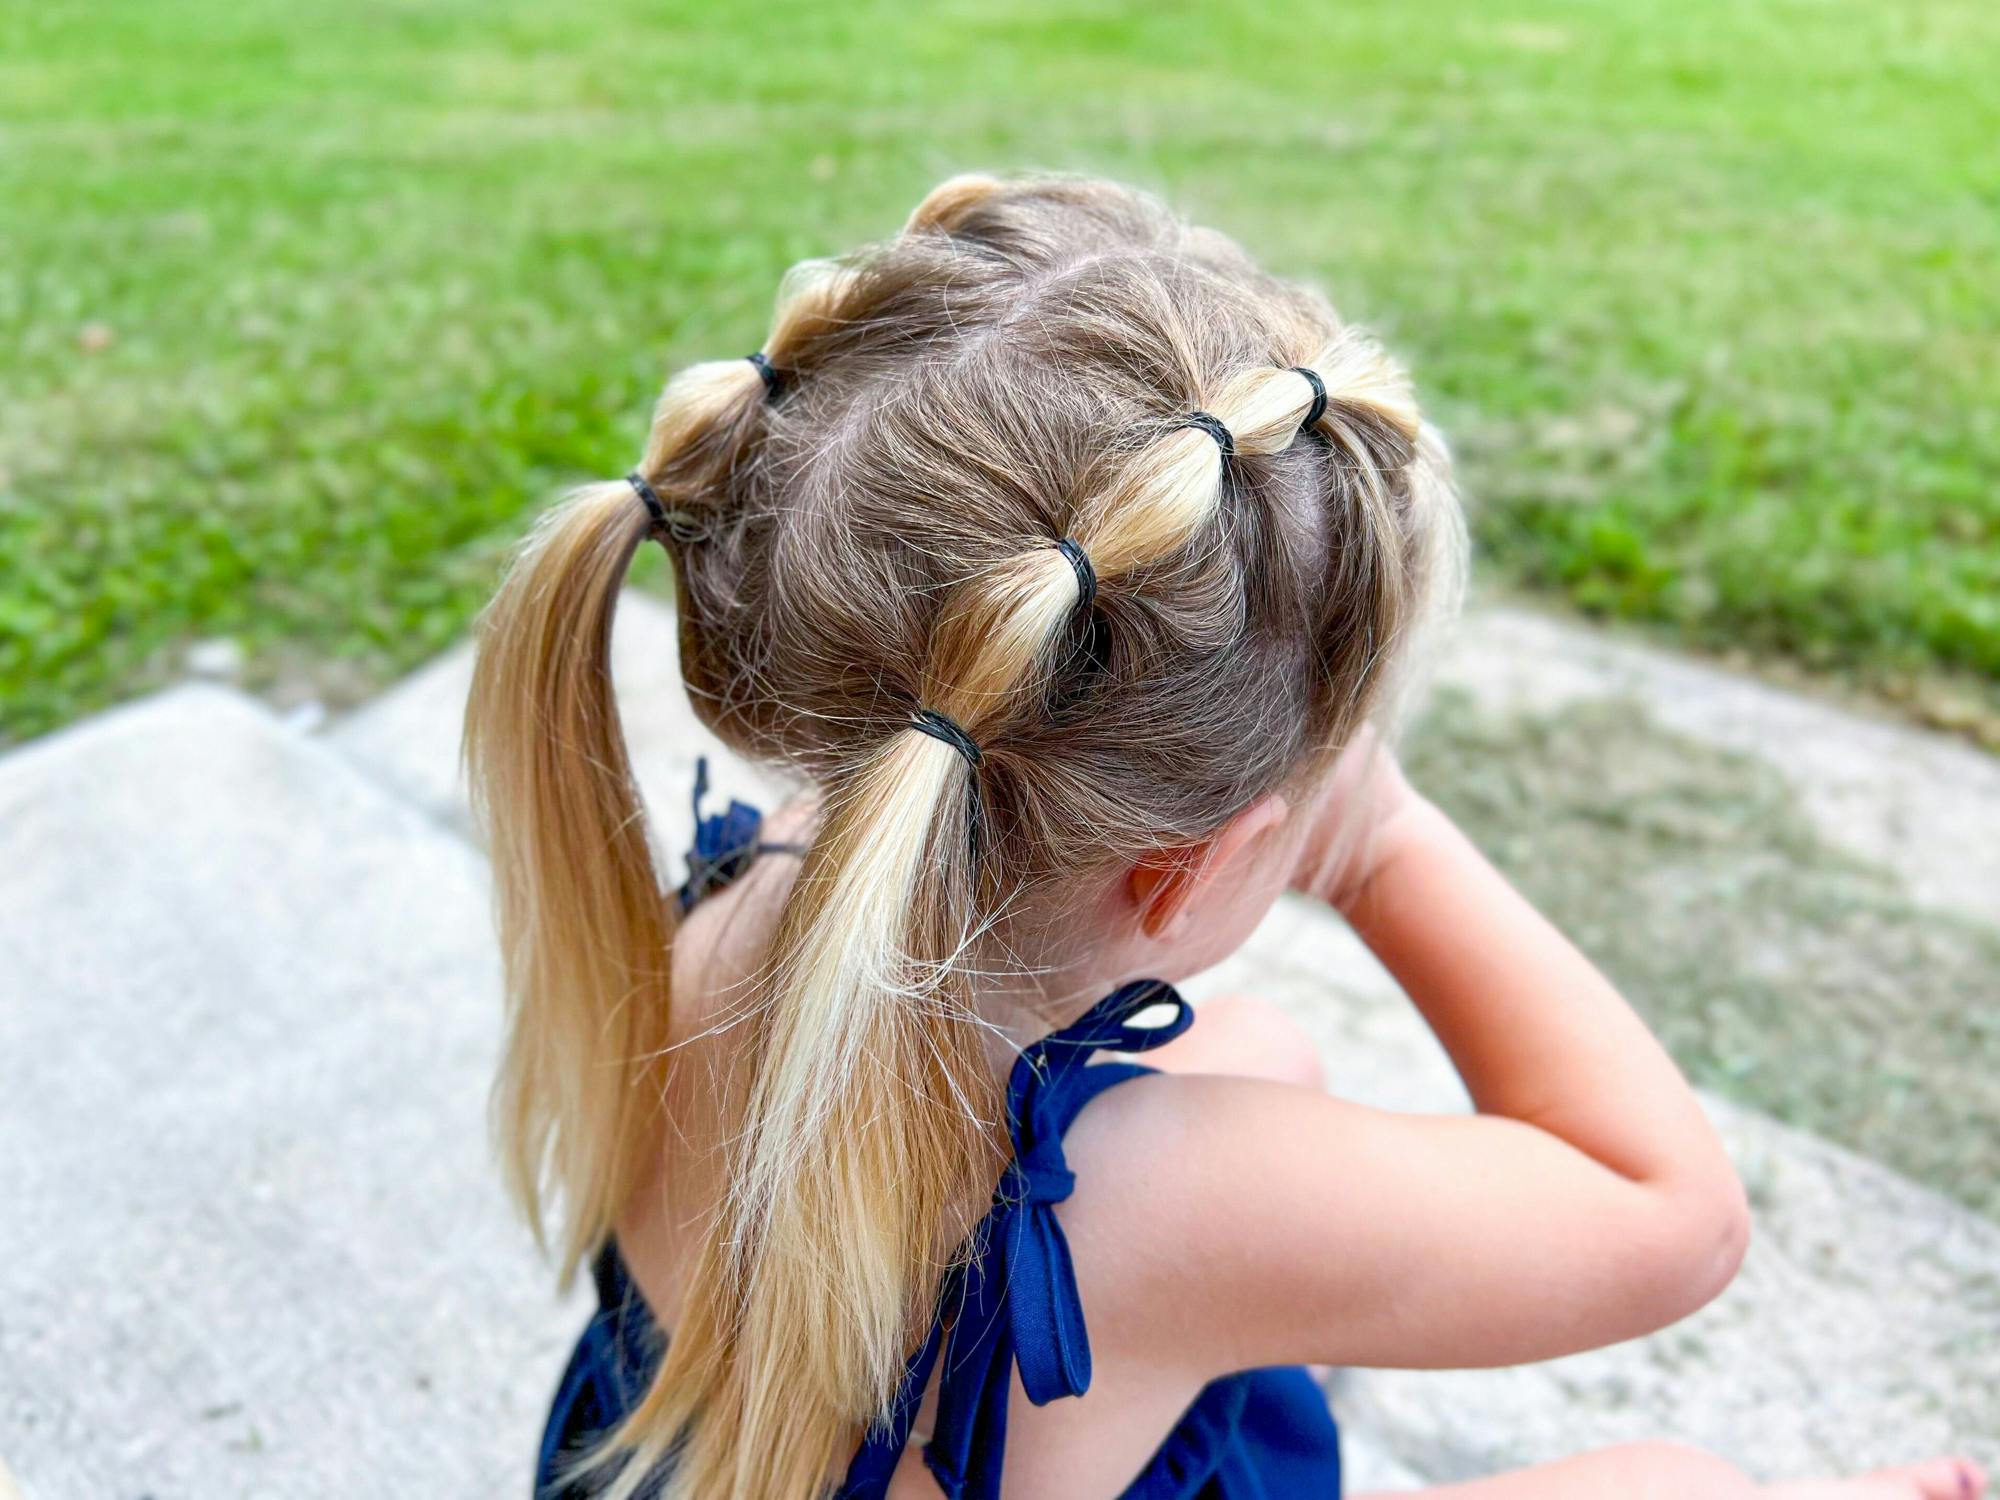 5 Minute Hairstyles for School | Canada lifestyle | Fynes Designs